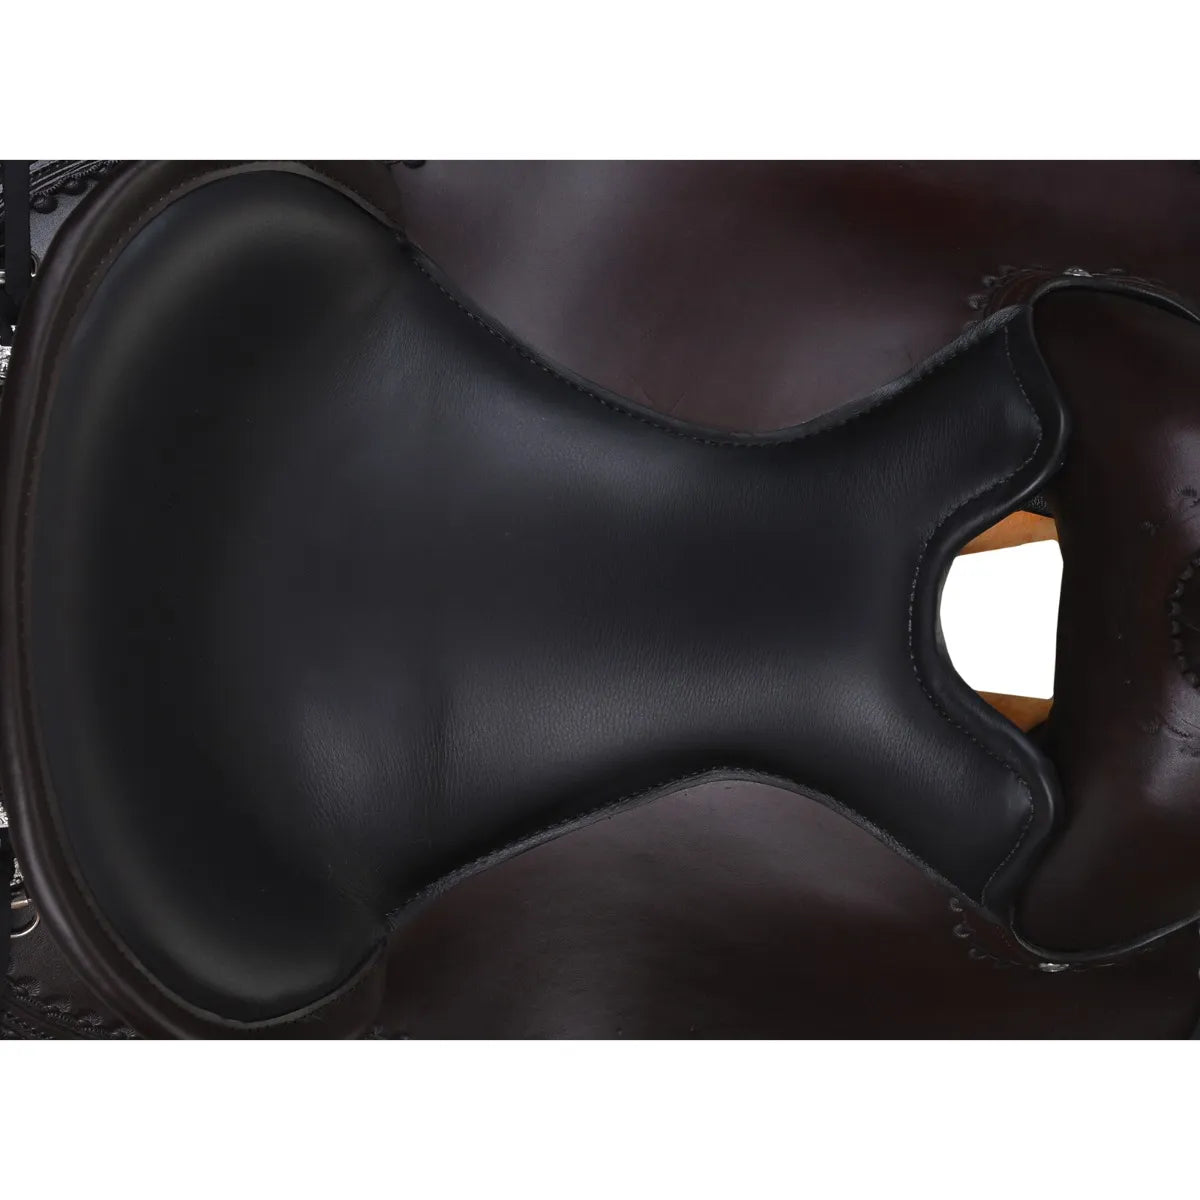 Circle Y 1582 Kentucky Trail Gaiter Saddle, 17", Wide Fit